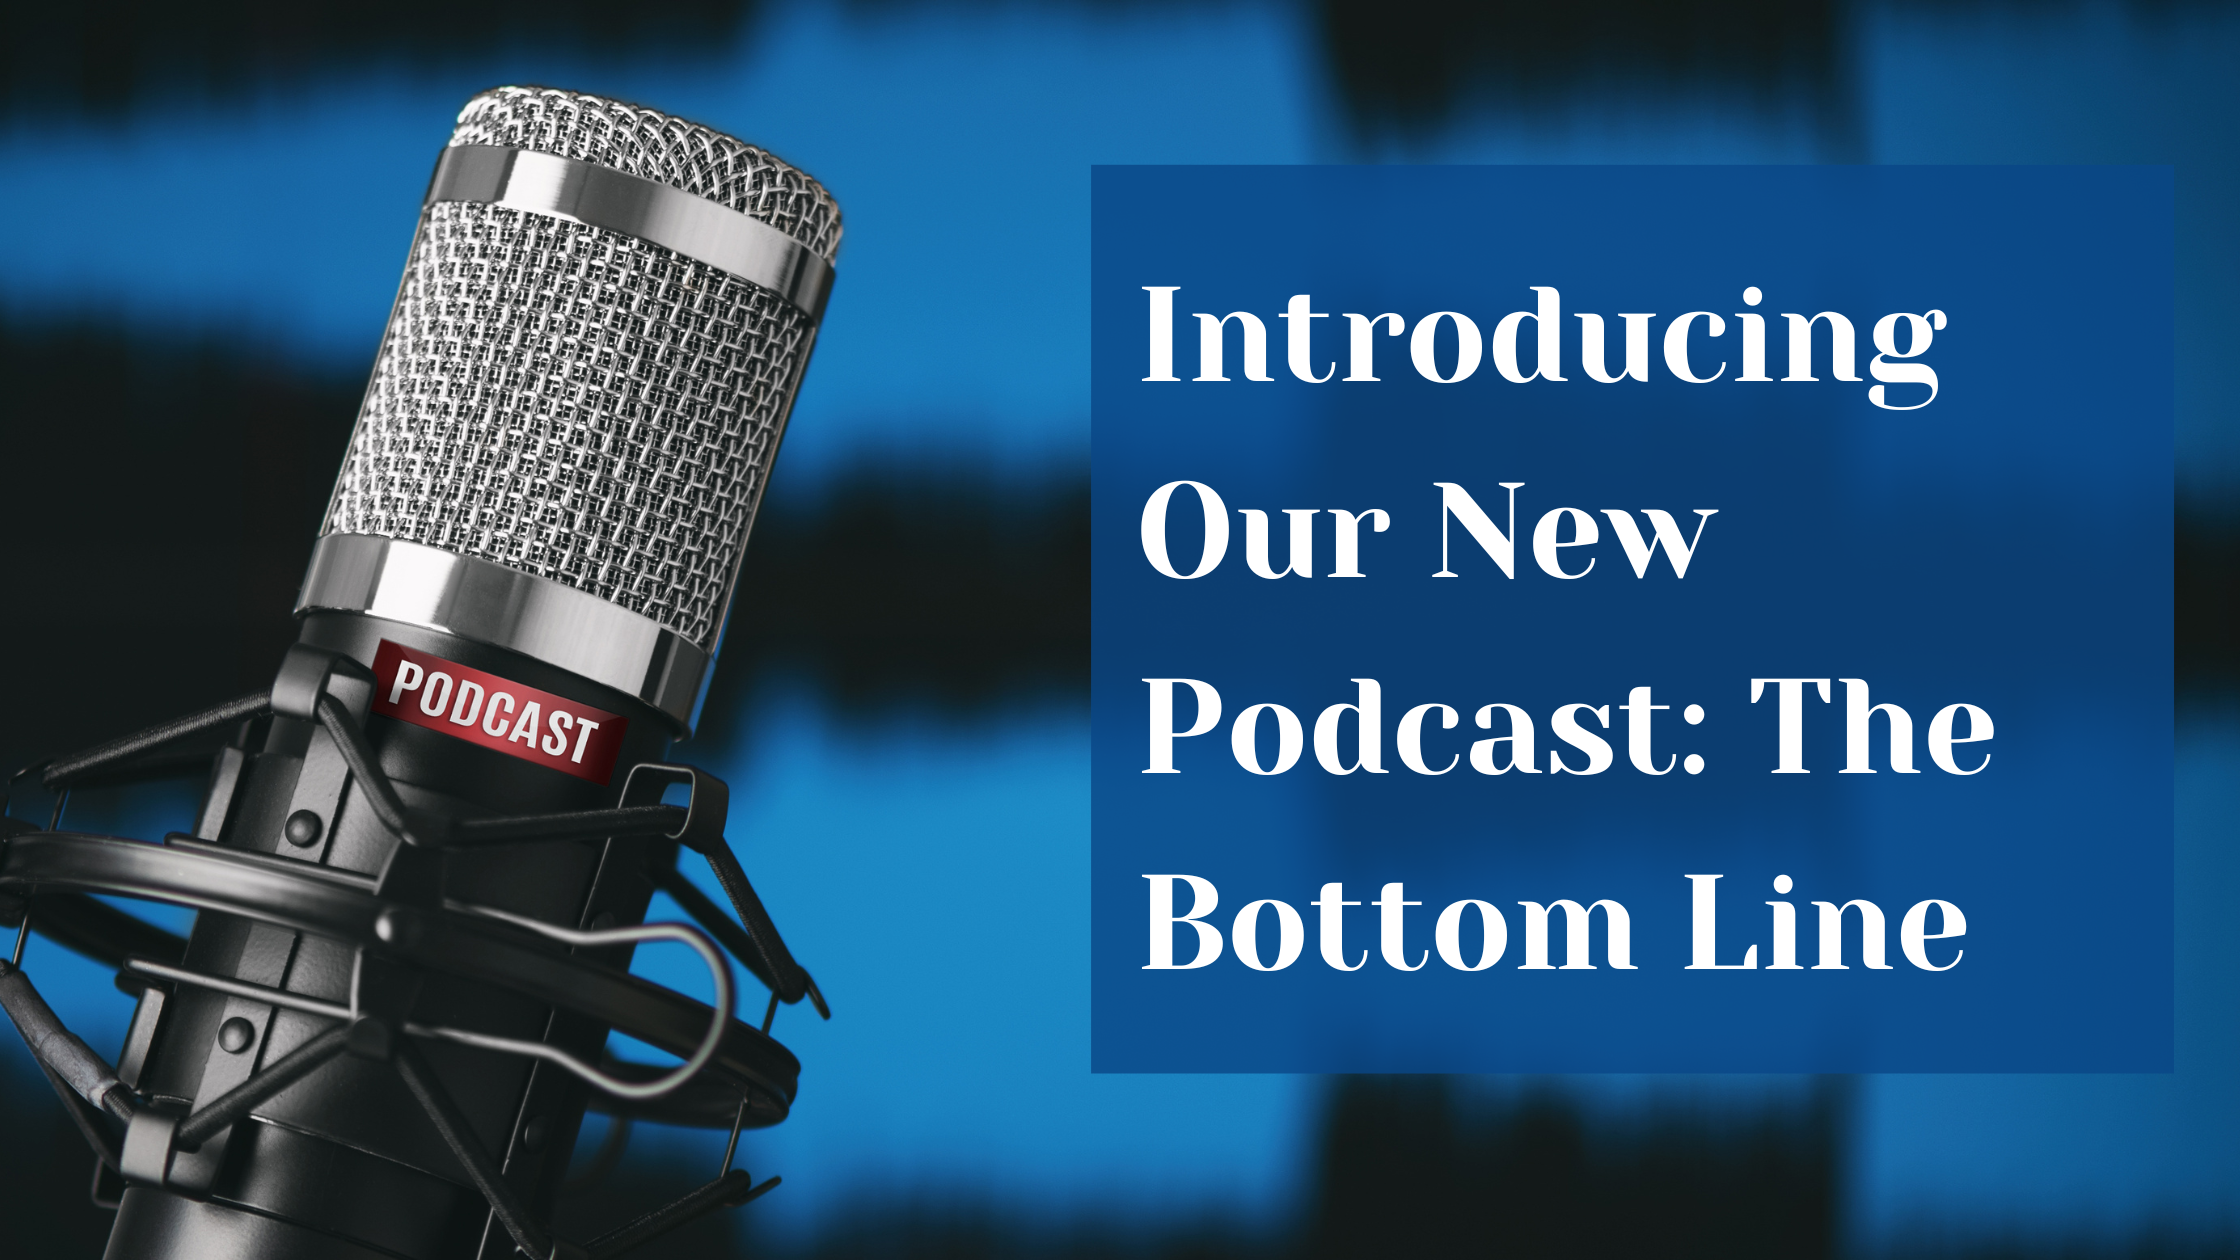 Our New Podcast Is Here! Introducing The Bottom Line